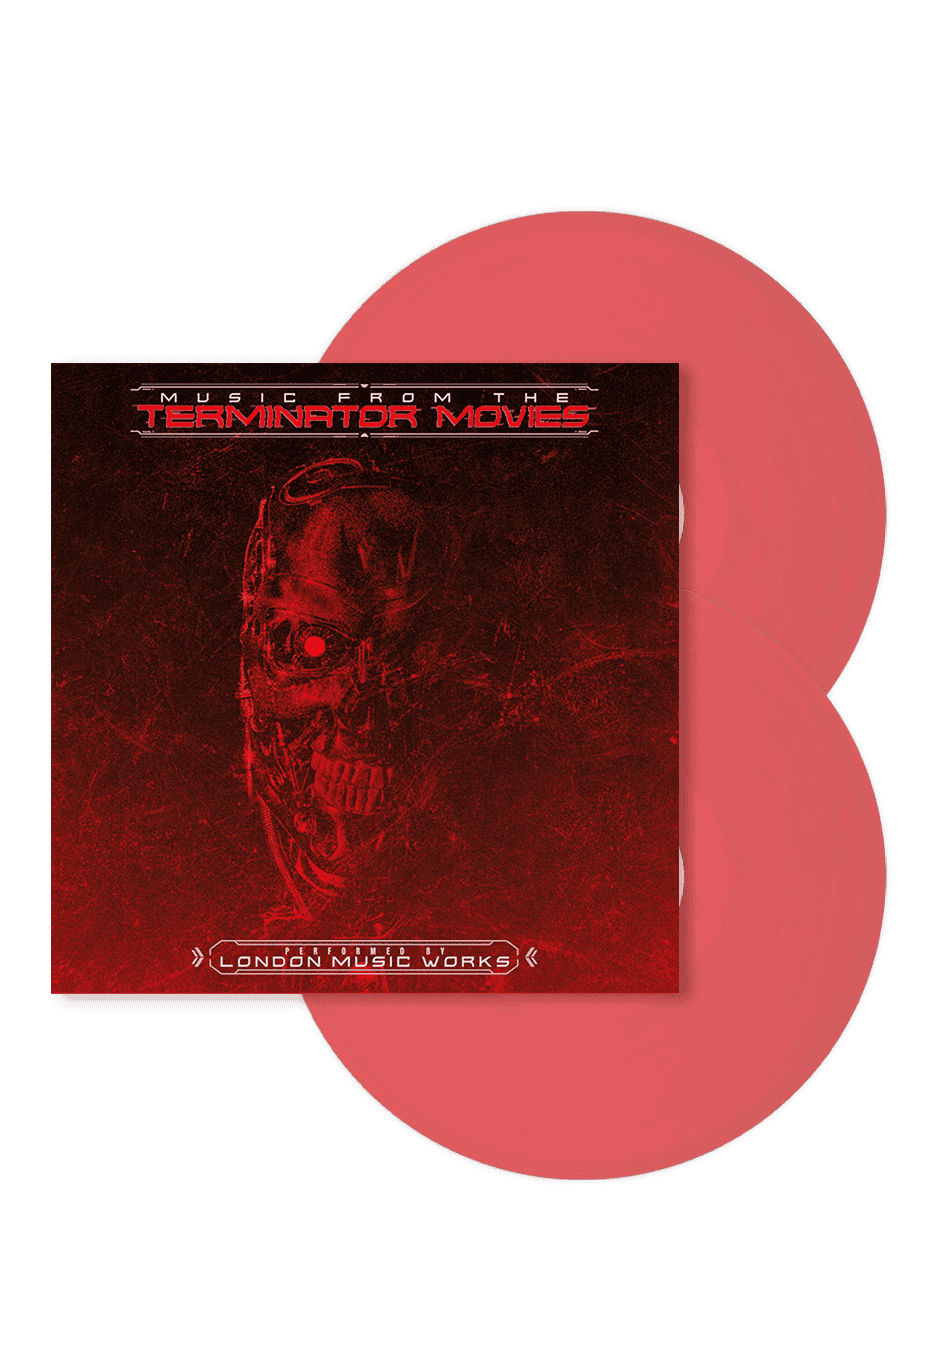 LONDON MUSIC WORKS - Music from the Terminator Movies Vinyl Transparent Red 